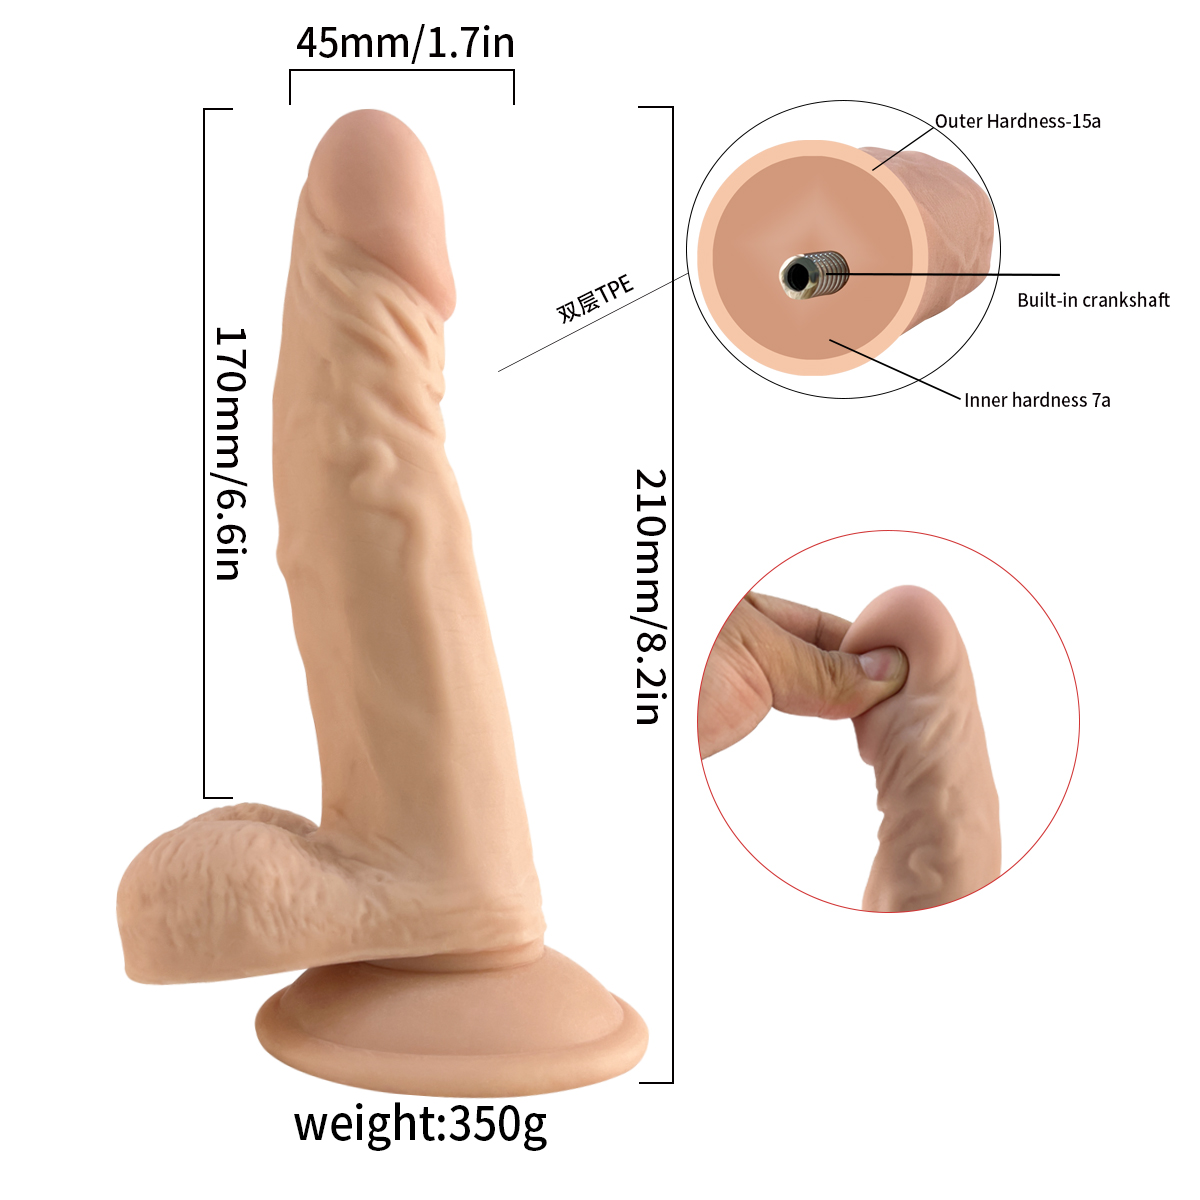 Wholesale Plastic Penis Price Realistic Dildo-Sex-Toys Silicone Penis Adult Sex Toys Dildo for Women Rubber Penis Artificial Penis factory and manufacturers Dreamsex